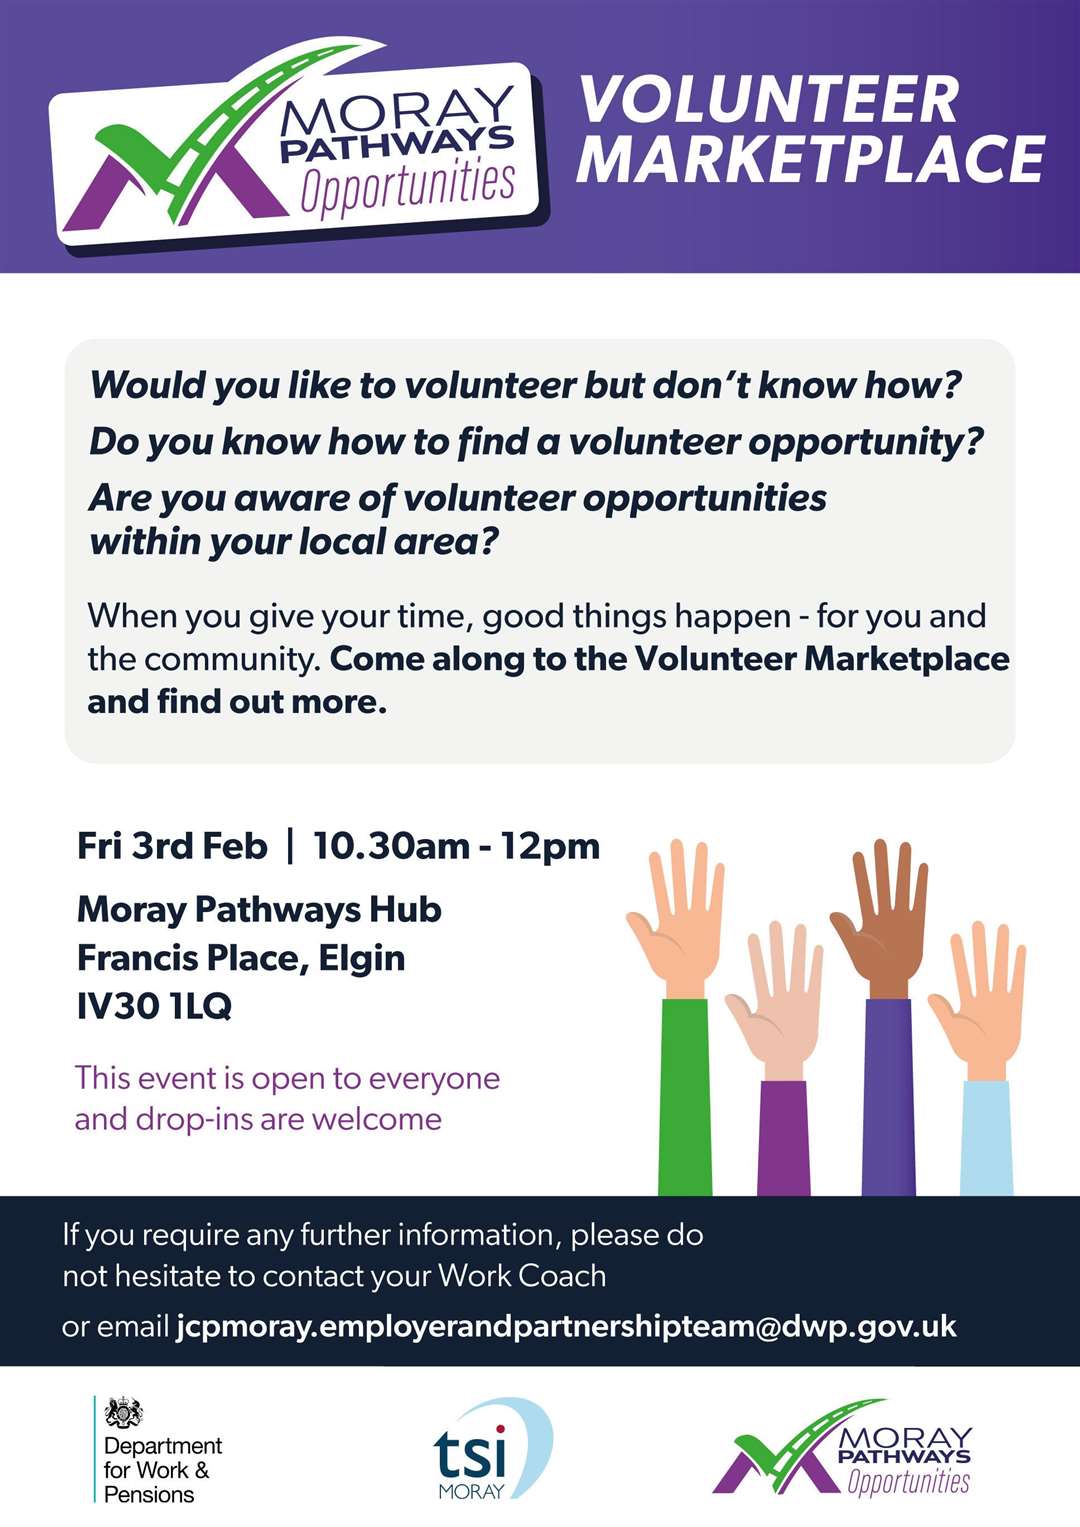 A wide range of organisations will be represented at the Volunteer Marketplace drop-in.